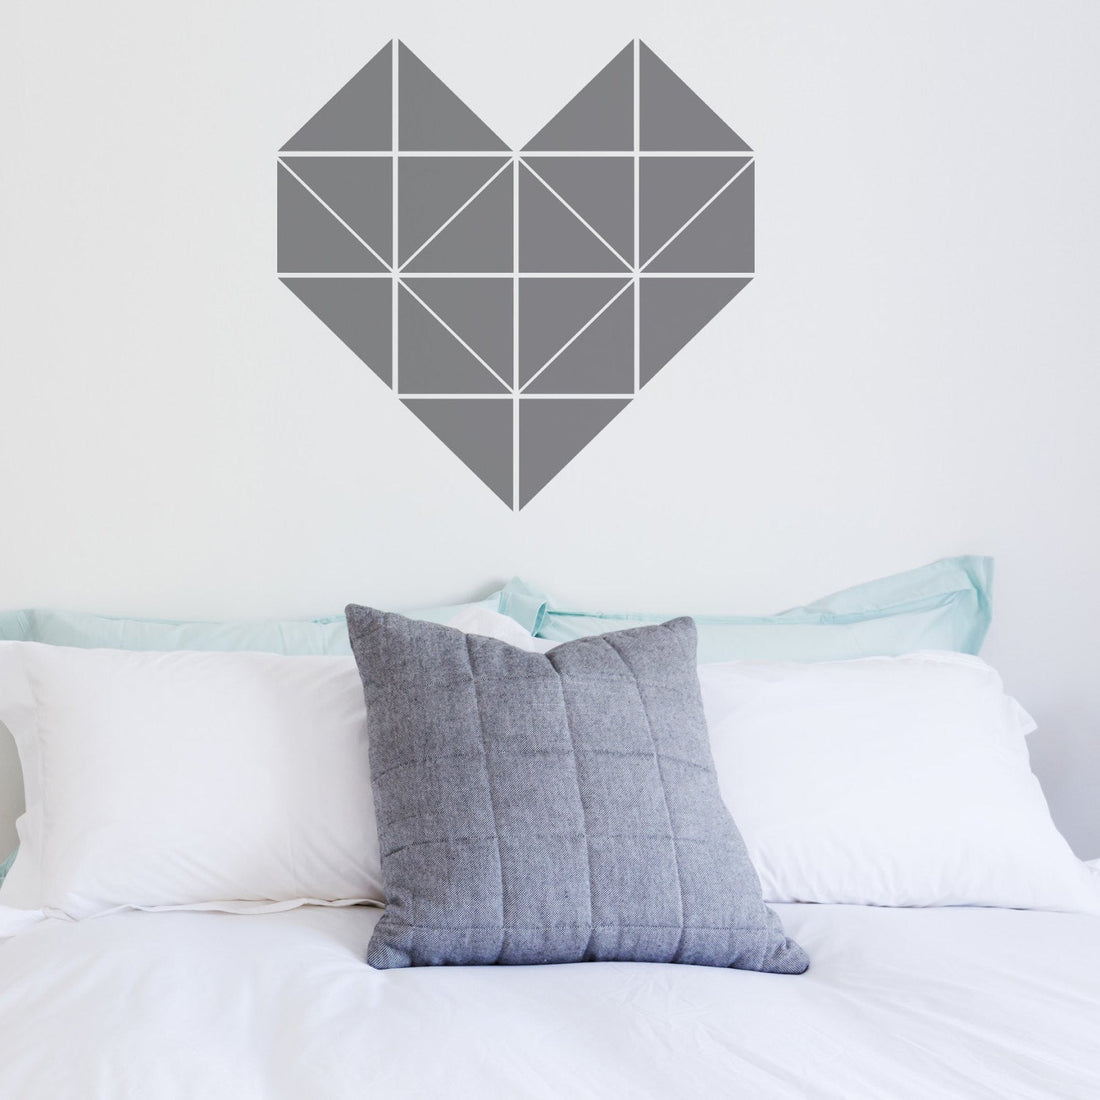 Geometric heart sticker above a double bed 